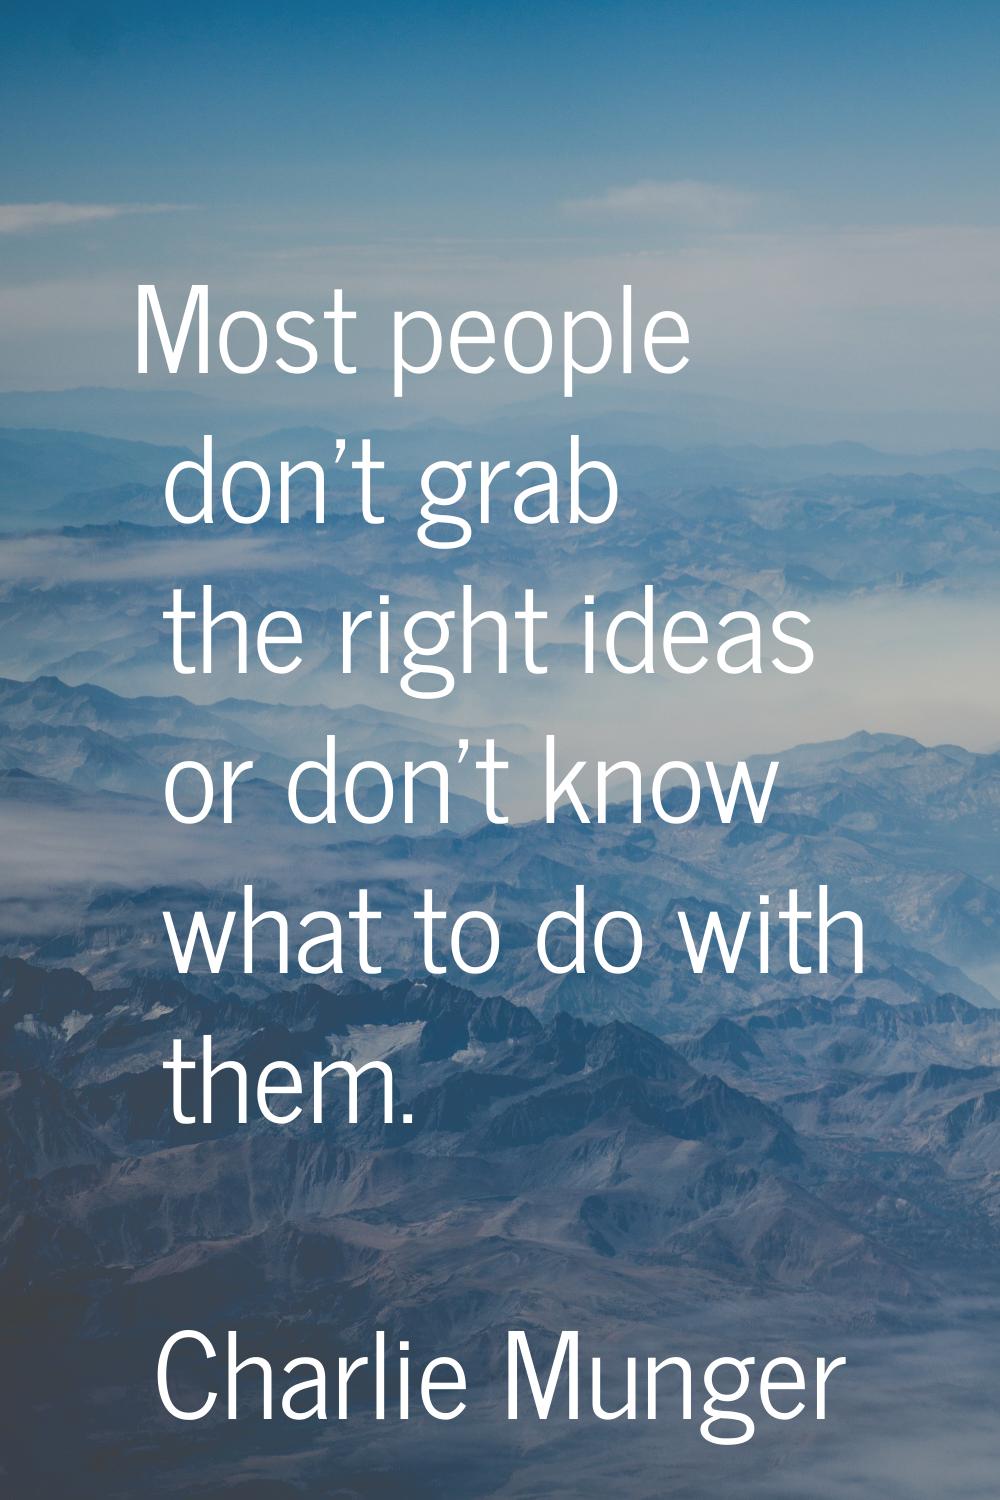 Most people don't grab the right ideas or don't know what to do with them.